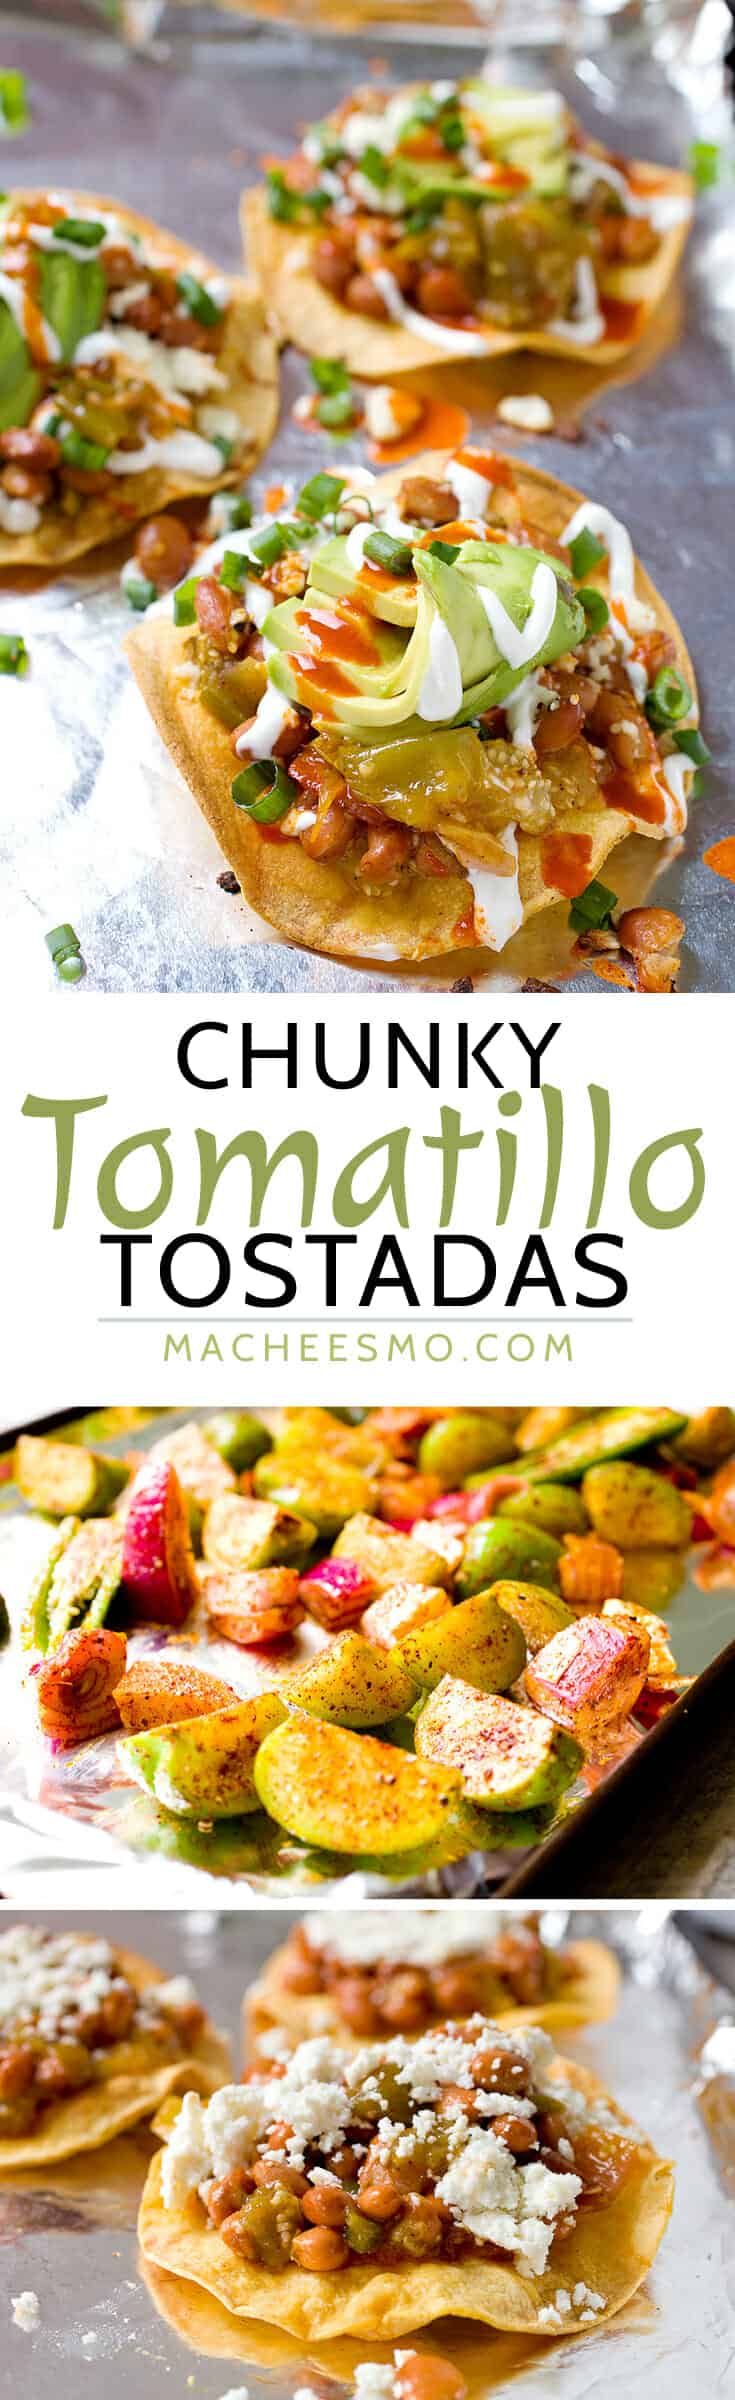 Chunky Tomatillo Tostadas: These crispy tostadas are topped with roasted tomatillos, pinto beans, queso fresco, and lots of other good toppings. Quick vegetarian Tex-mex dinner alert! | macheesmo.com